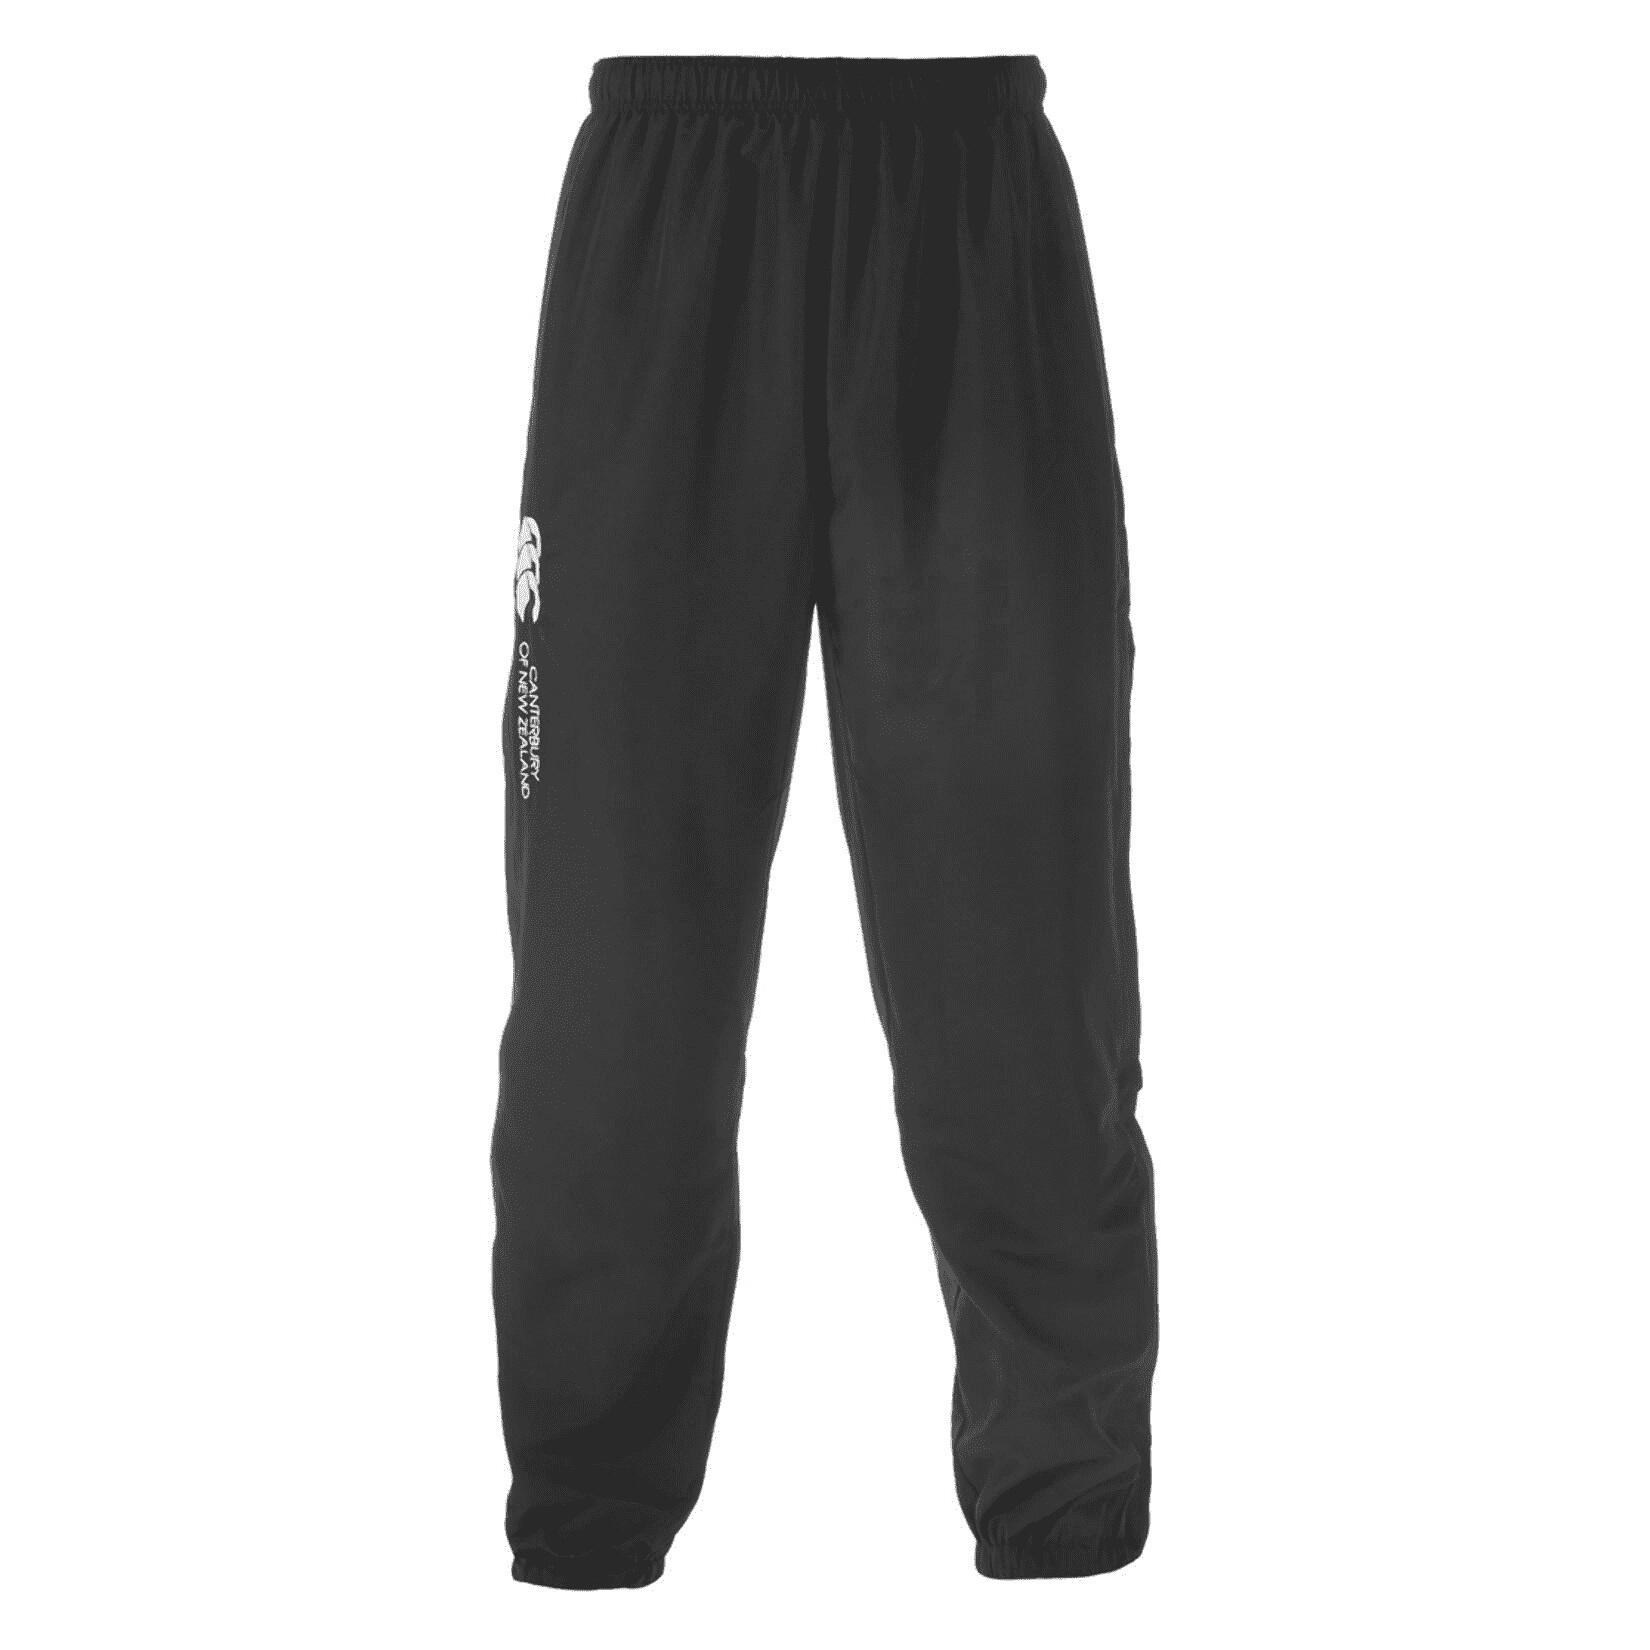 CANTERBURY Childrens/Kids Cuffed Ankle Tracksuit Bottoms (Black)